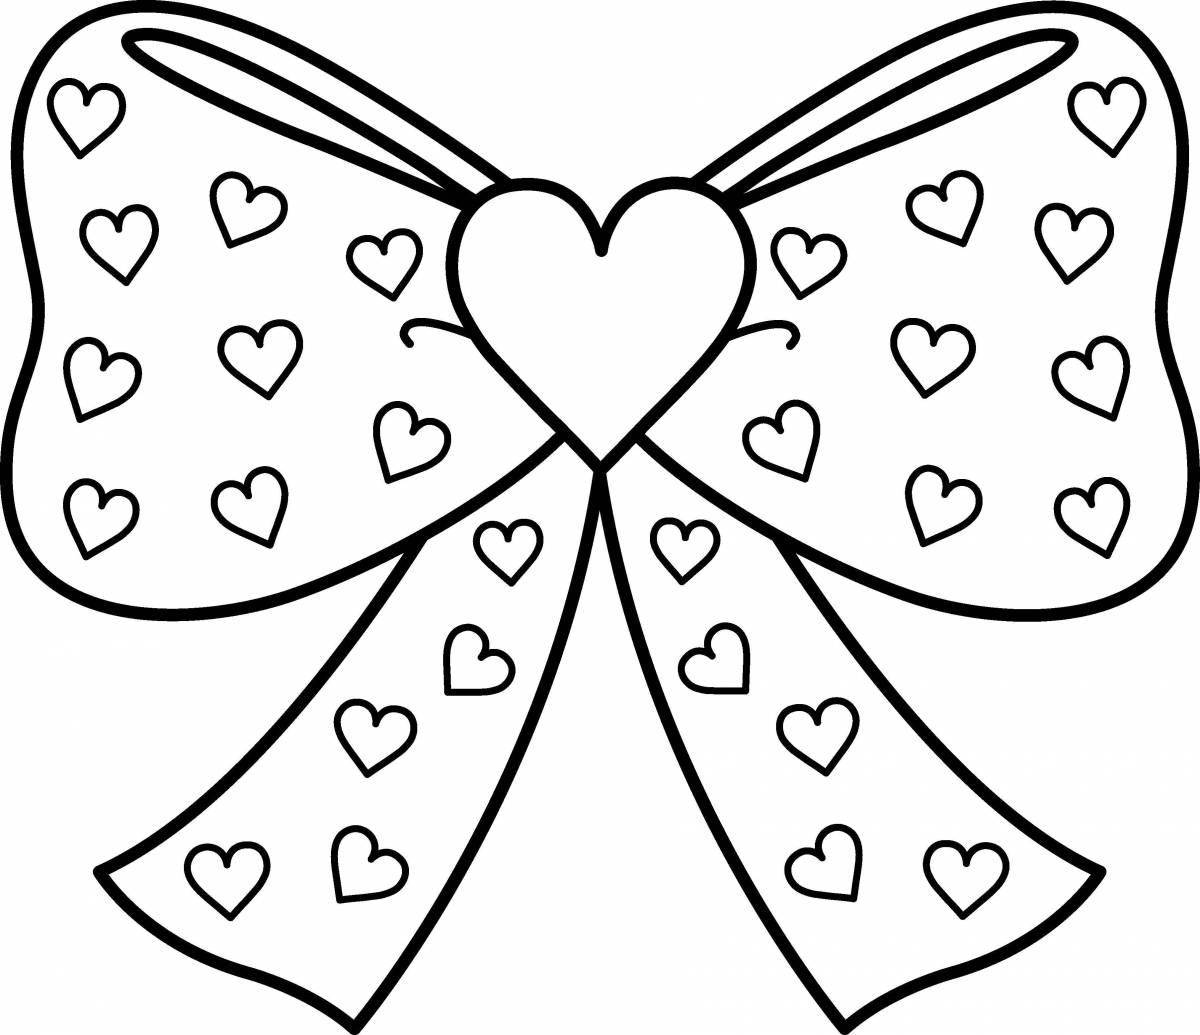 Glamorous coloring pages for kids